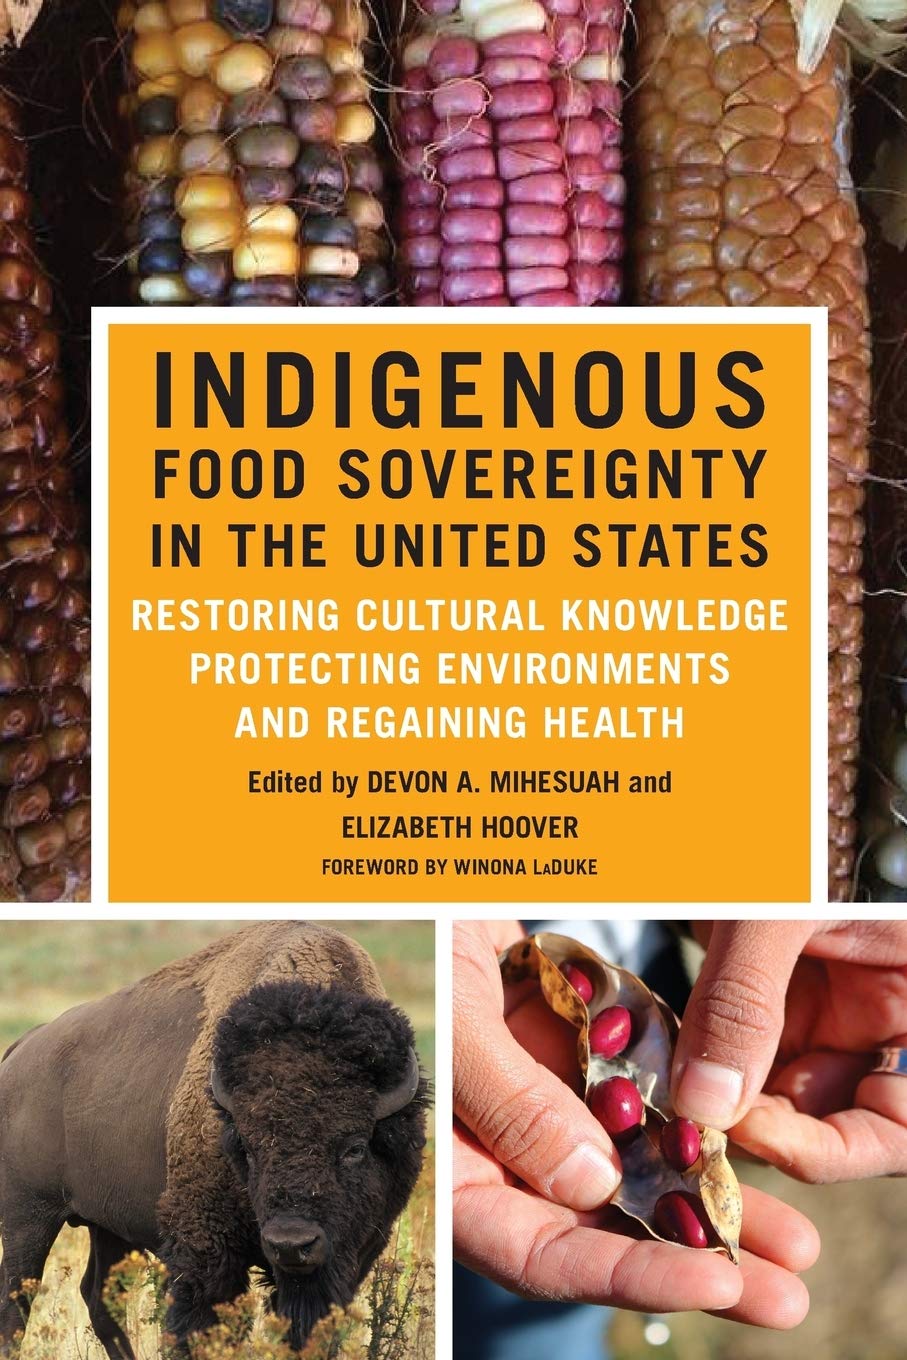 "Indigenous Food Sovereignty in the United States" book cover